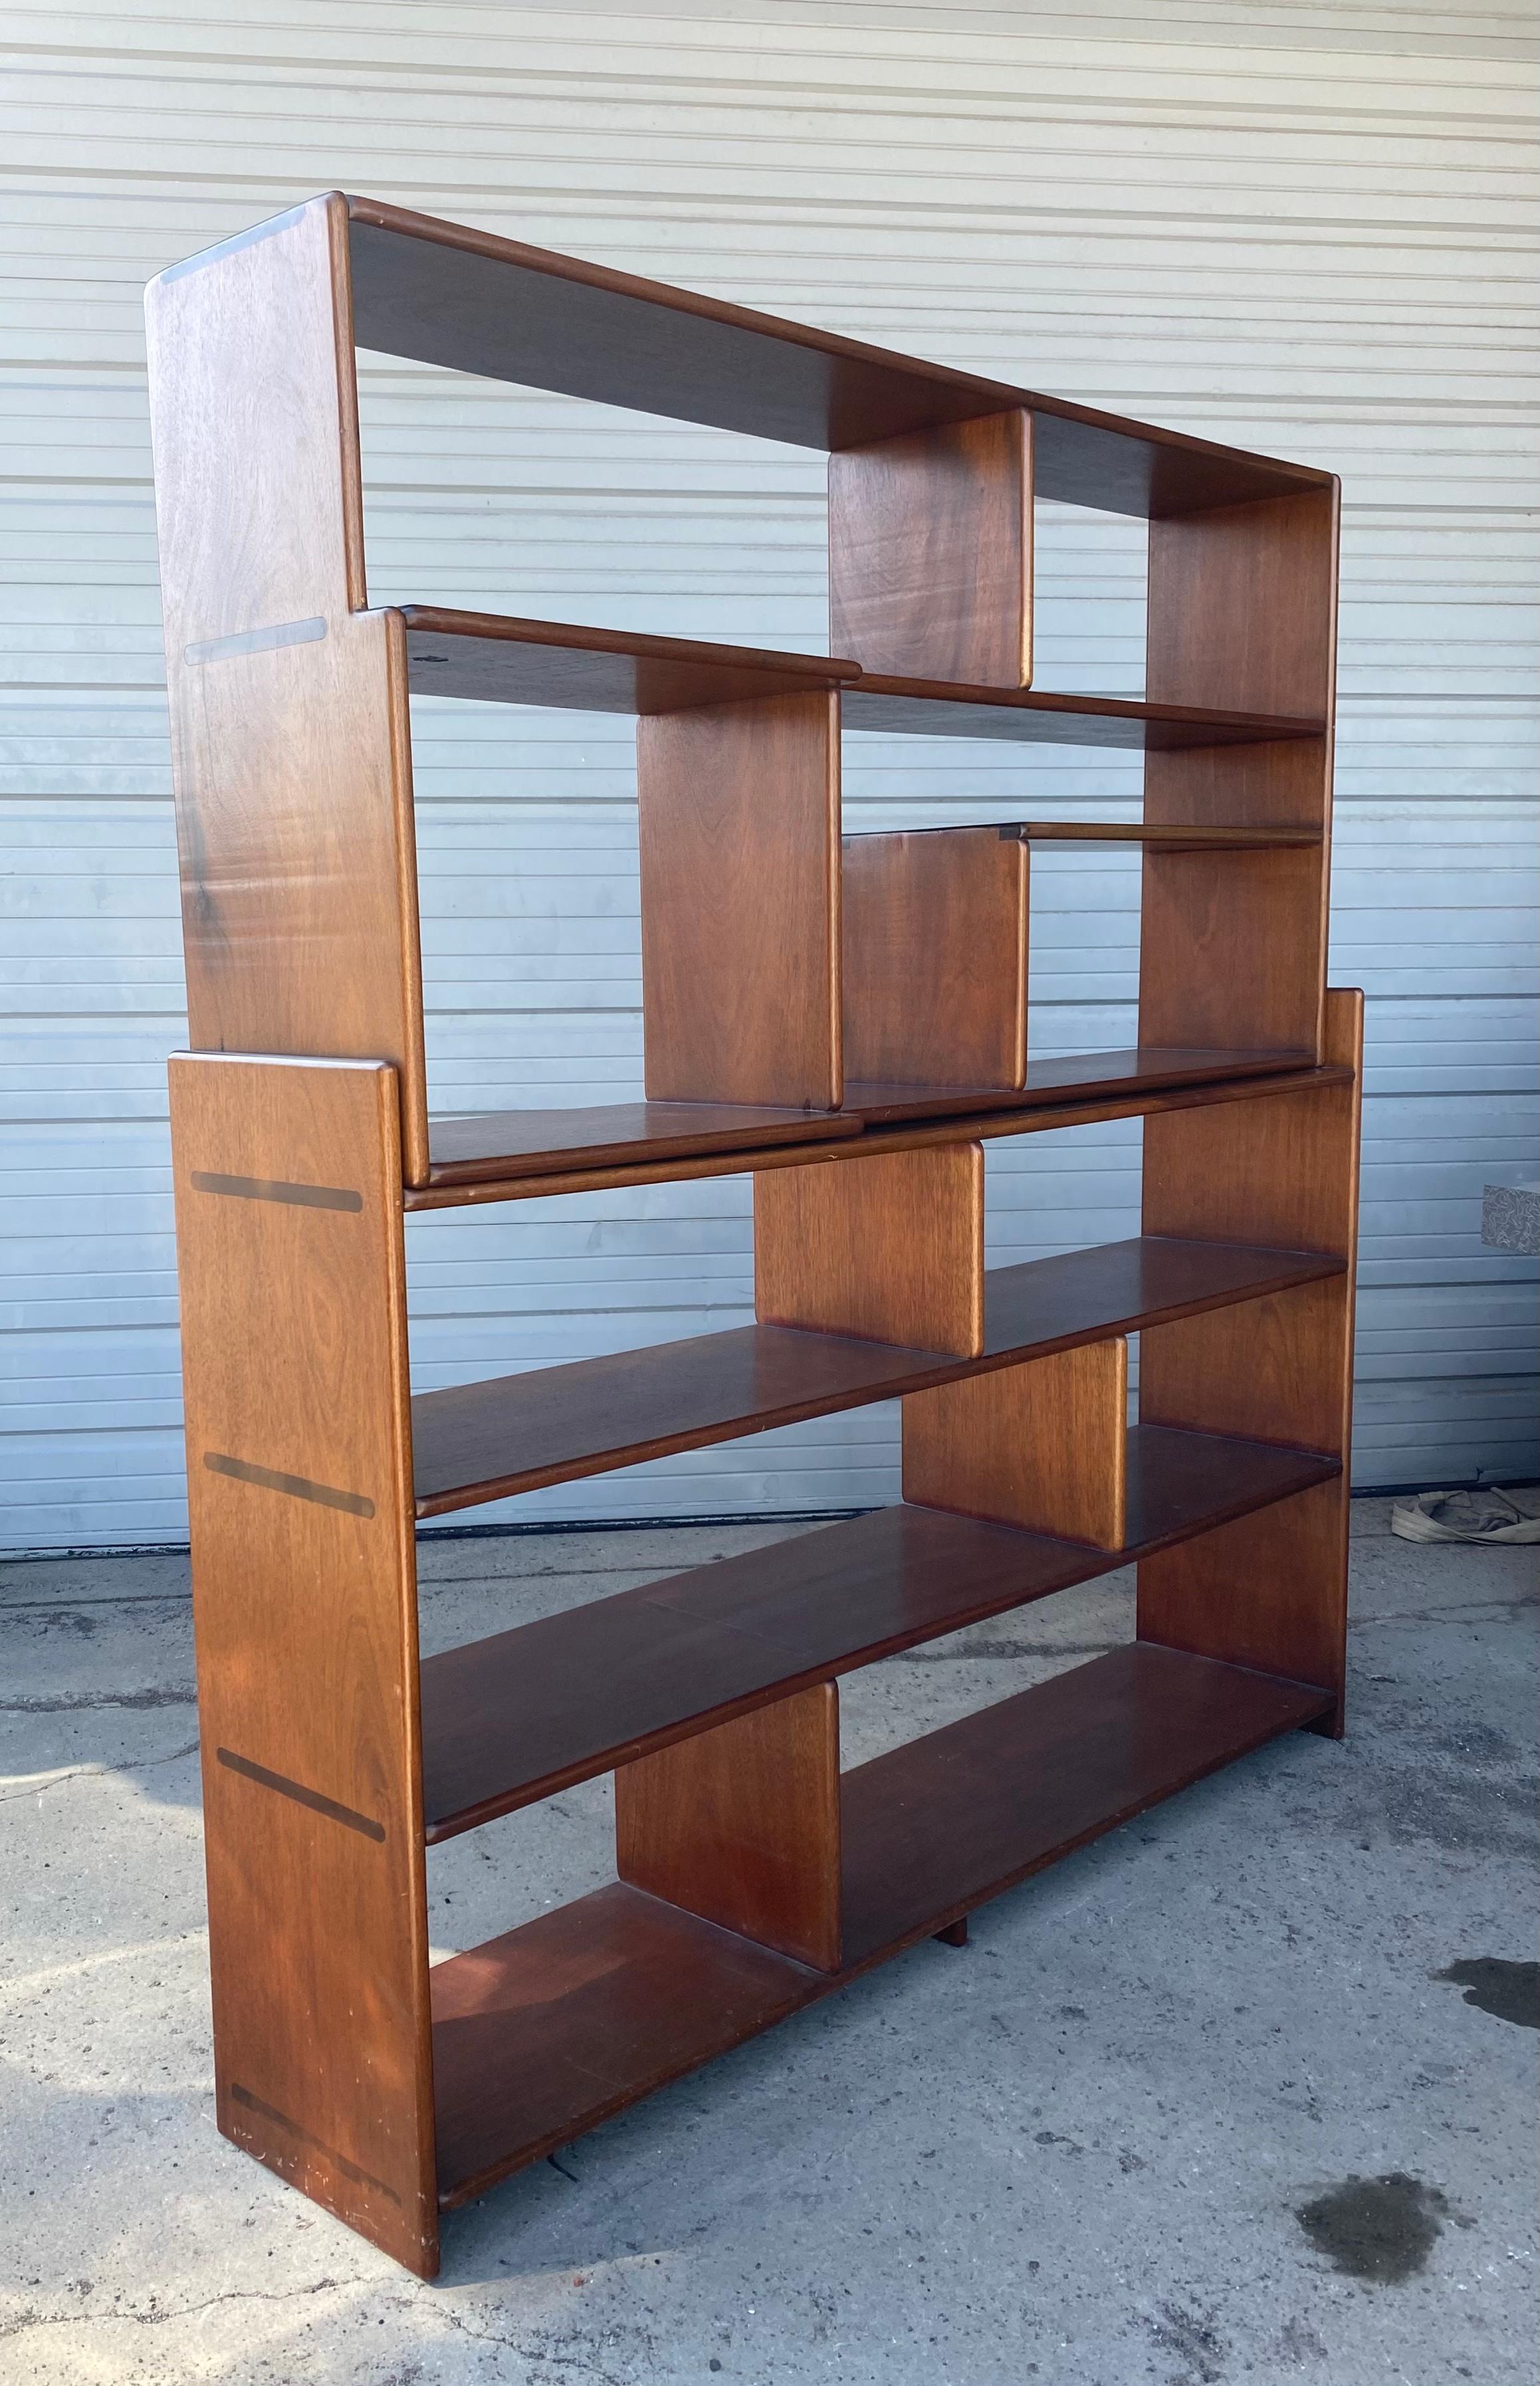 Stunning American Crafts Modernist- bench-made (BESPOKE) Bookcase, Room Divider, Shelving uit. VERY Asian modernist Mont inspired, Wonderfully handcrafted. Honduran Mahogany. Brass pin detailing,,Dovetail joinery, No IDEA who built and designed but